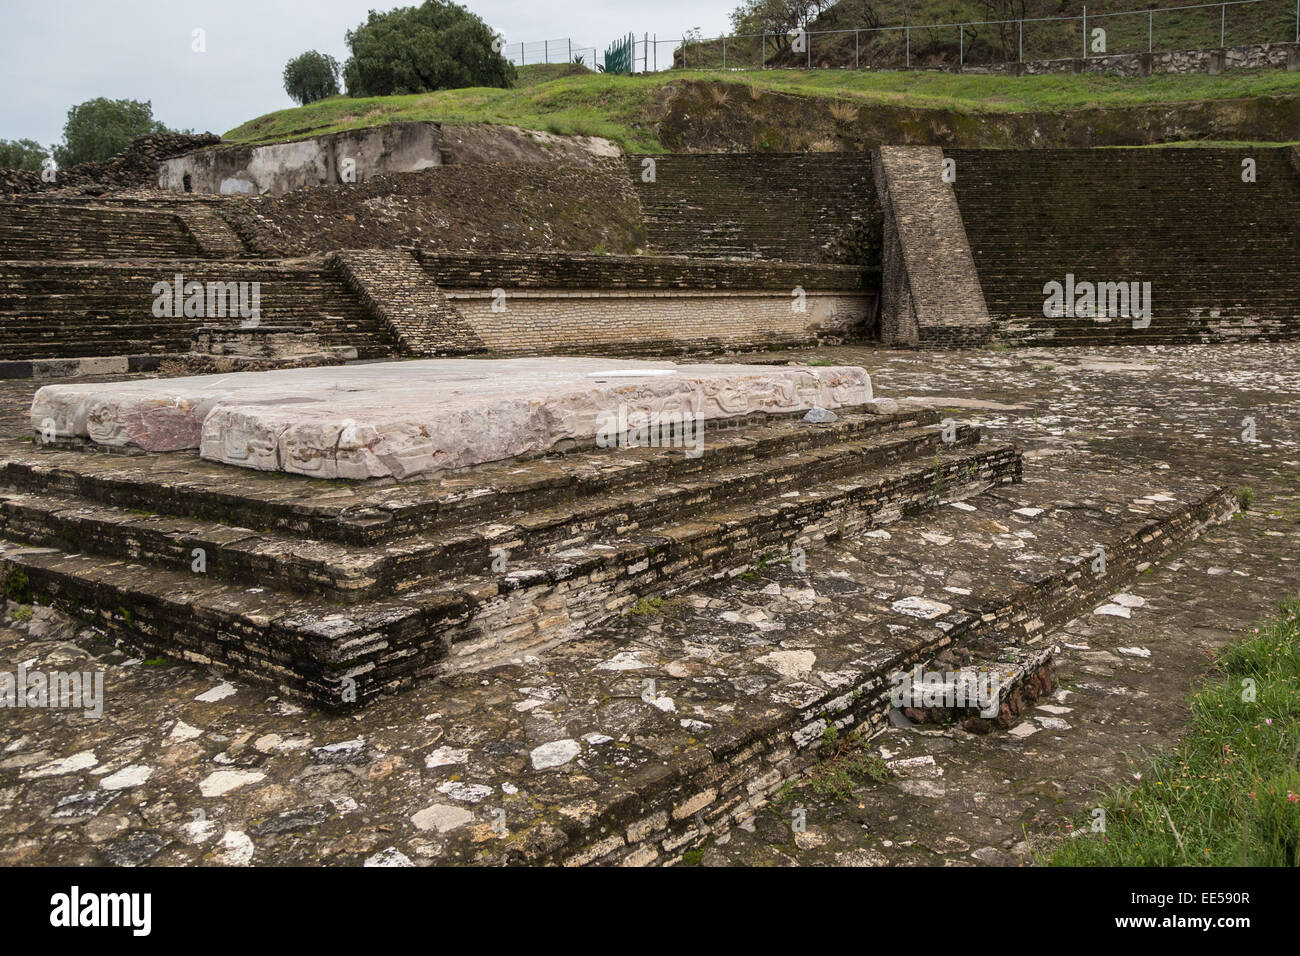 Excavated terrace & alter at the Great Pyramid of Cholula or Tlachihualtepetl, a prehispanic archaeological site in Puebla Mexico Stock Photo